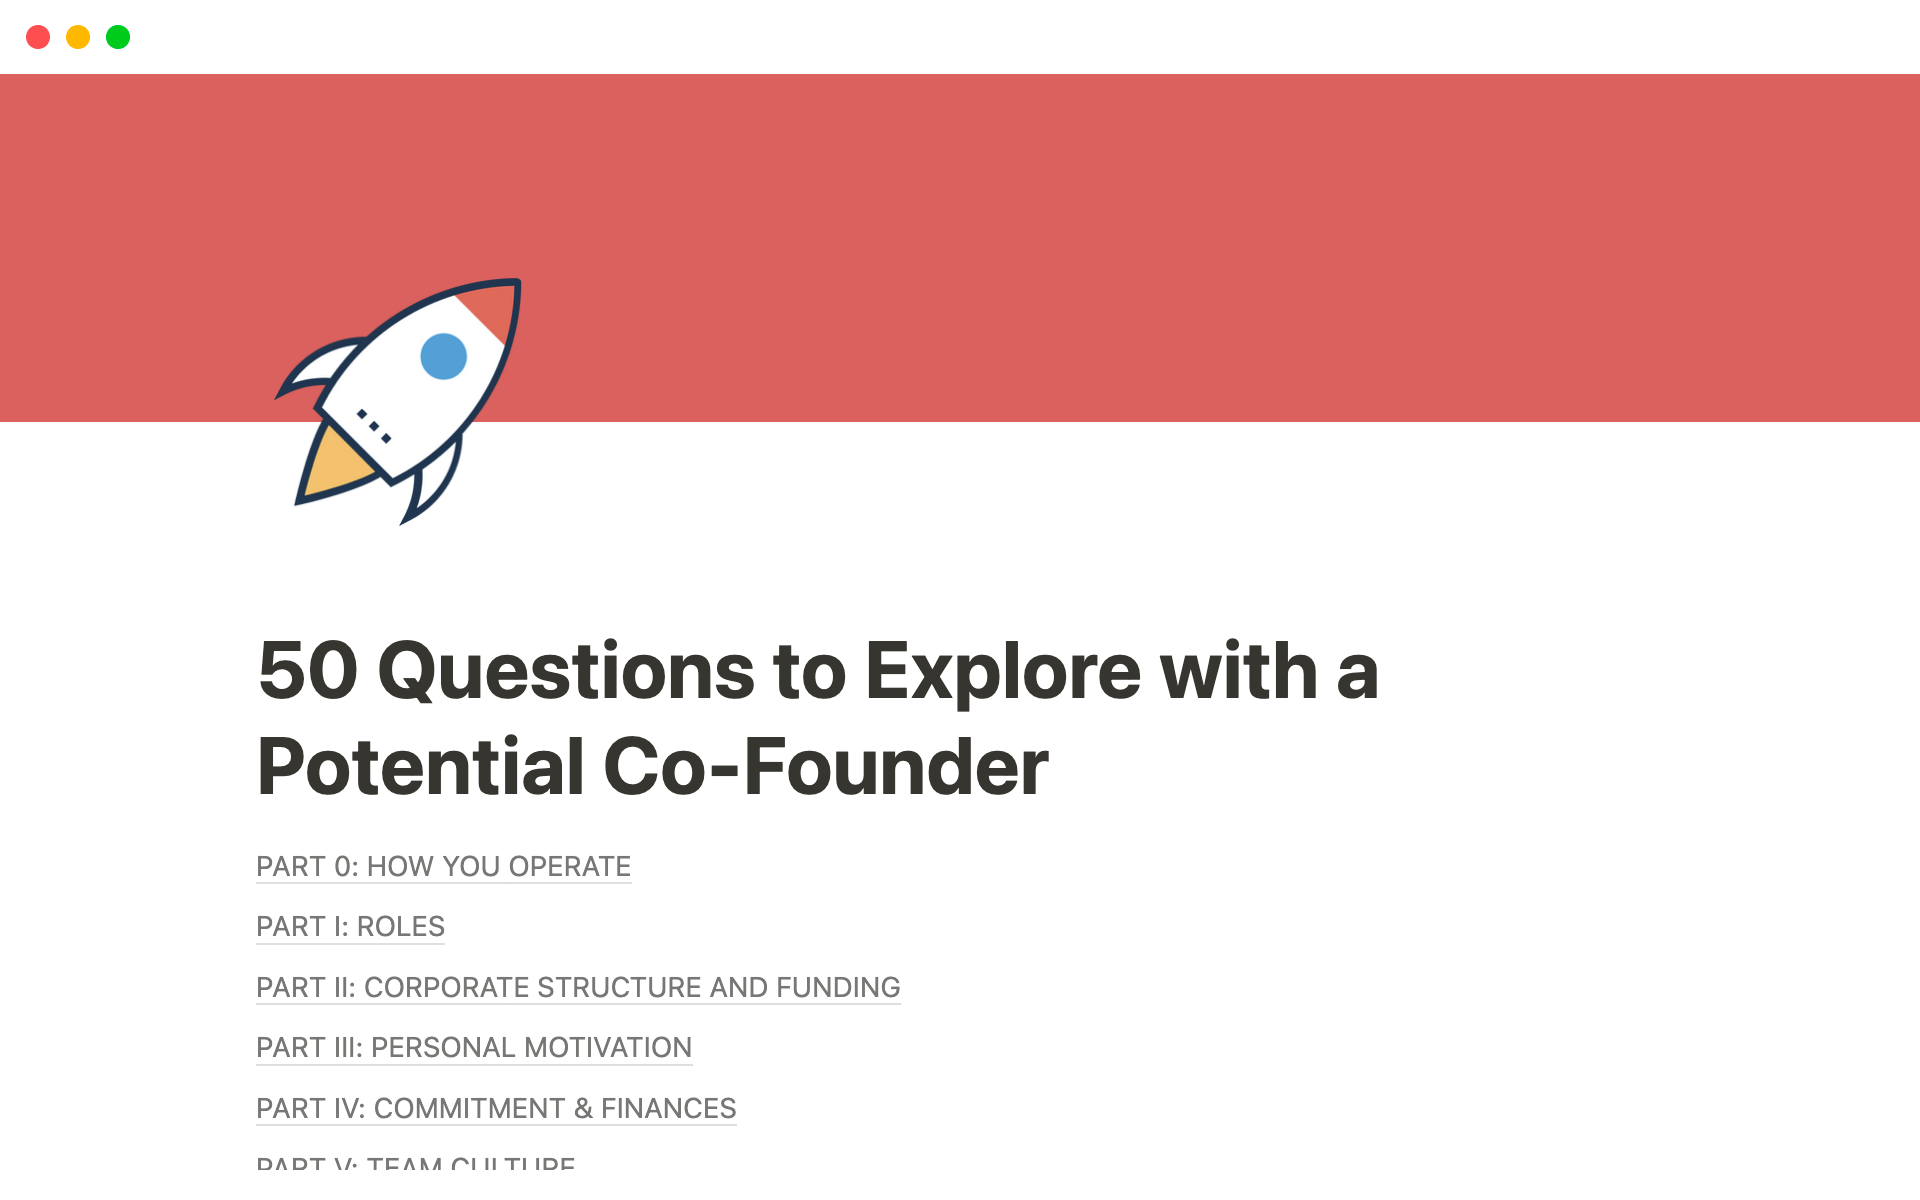 Help find the right cofounder.